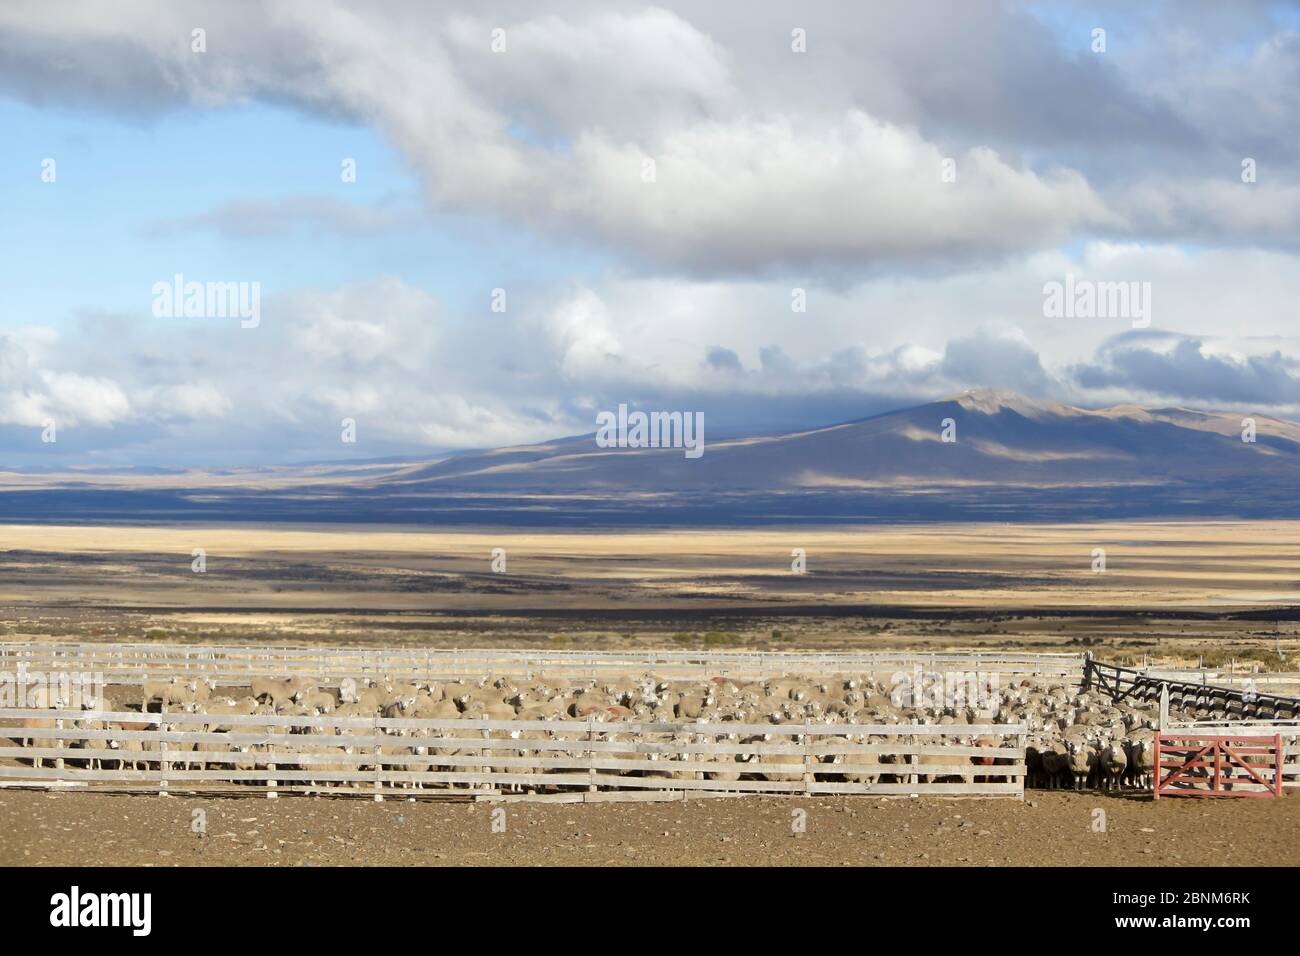 Sheep in pen in landscapes Torres del Paine. Patagonia, Puerto Natales, Chile. April 2016. Stock Photo